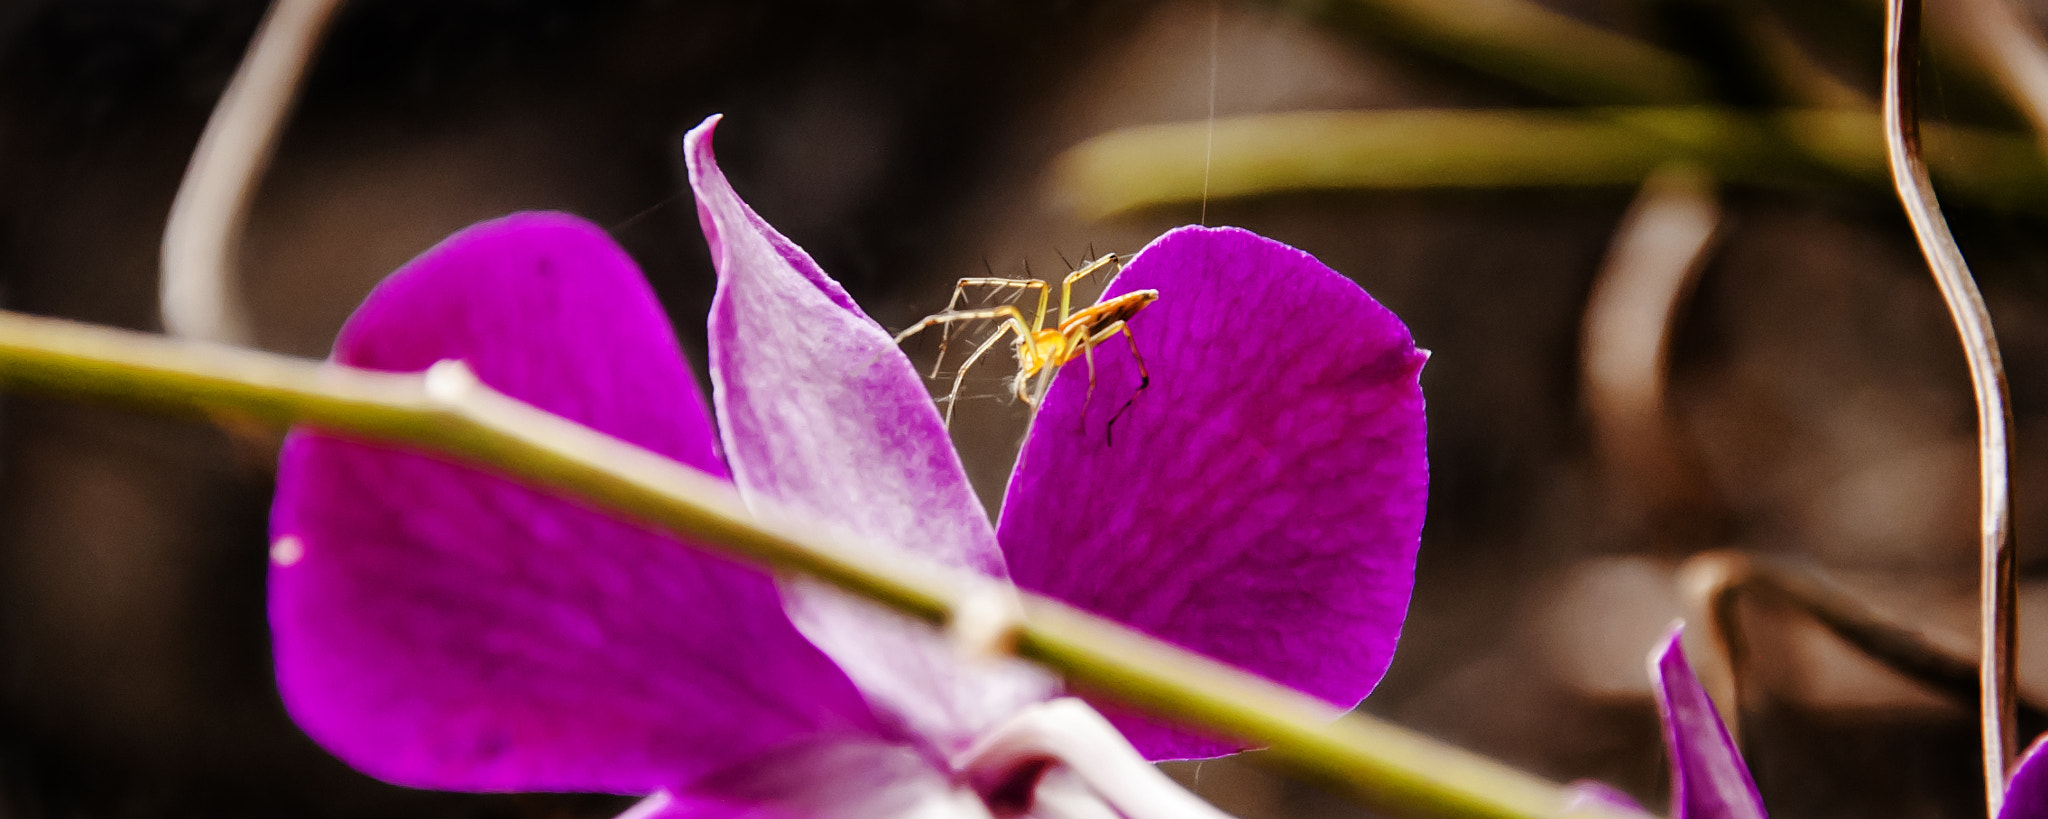 Nikon D50 sample photo. Spider on a purple orchid photography